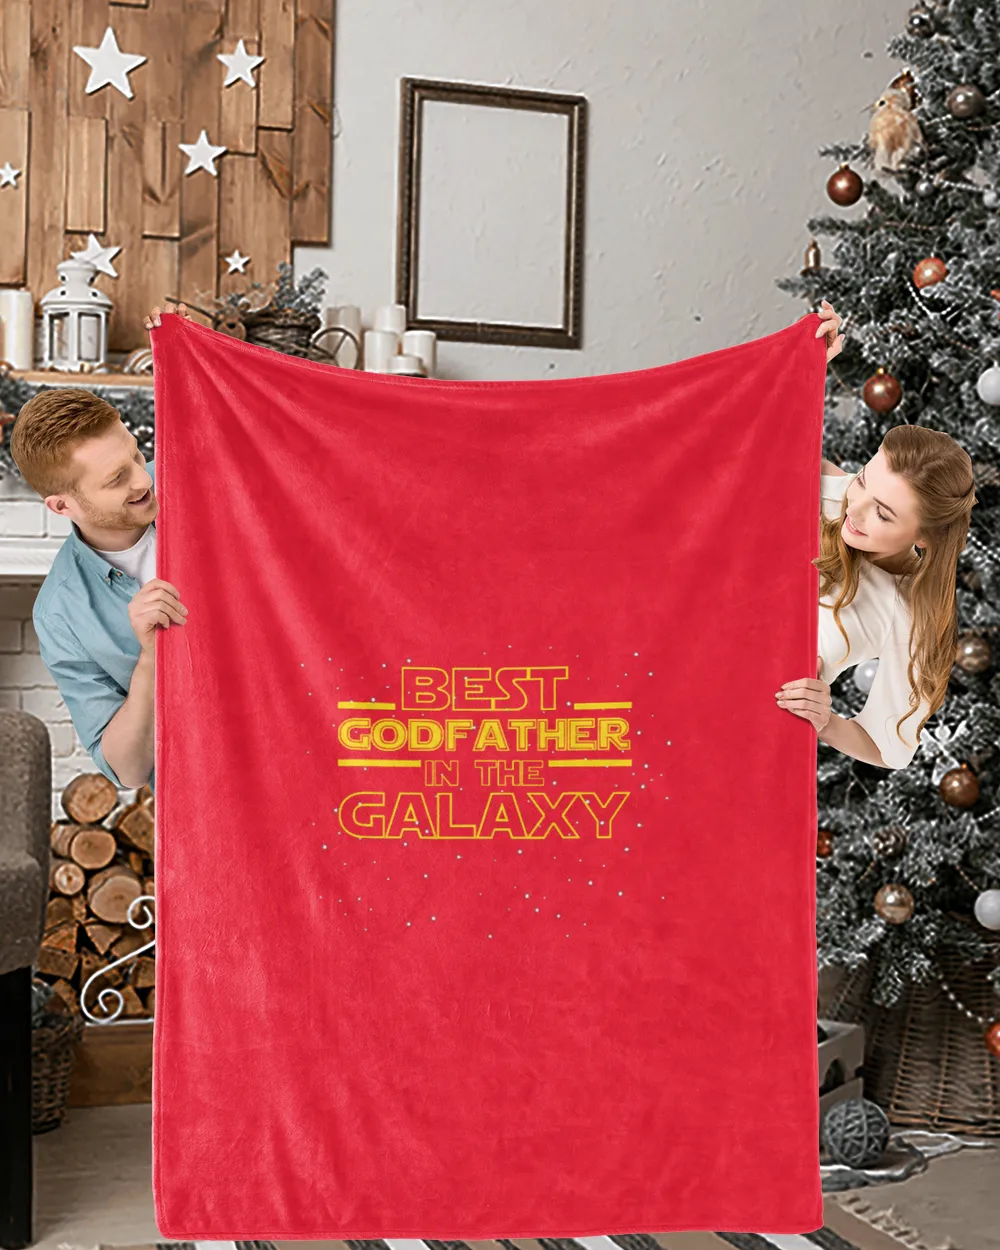 Mens Godparent Godfather Shirt Gift, Best Godfather in the Galaxy T-Shirt